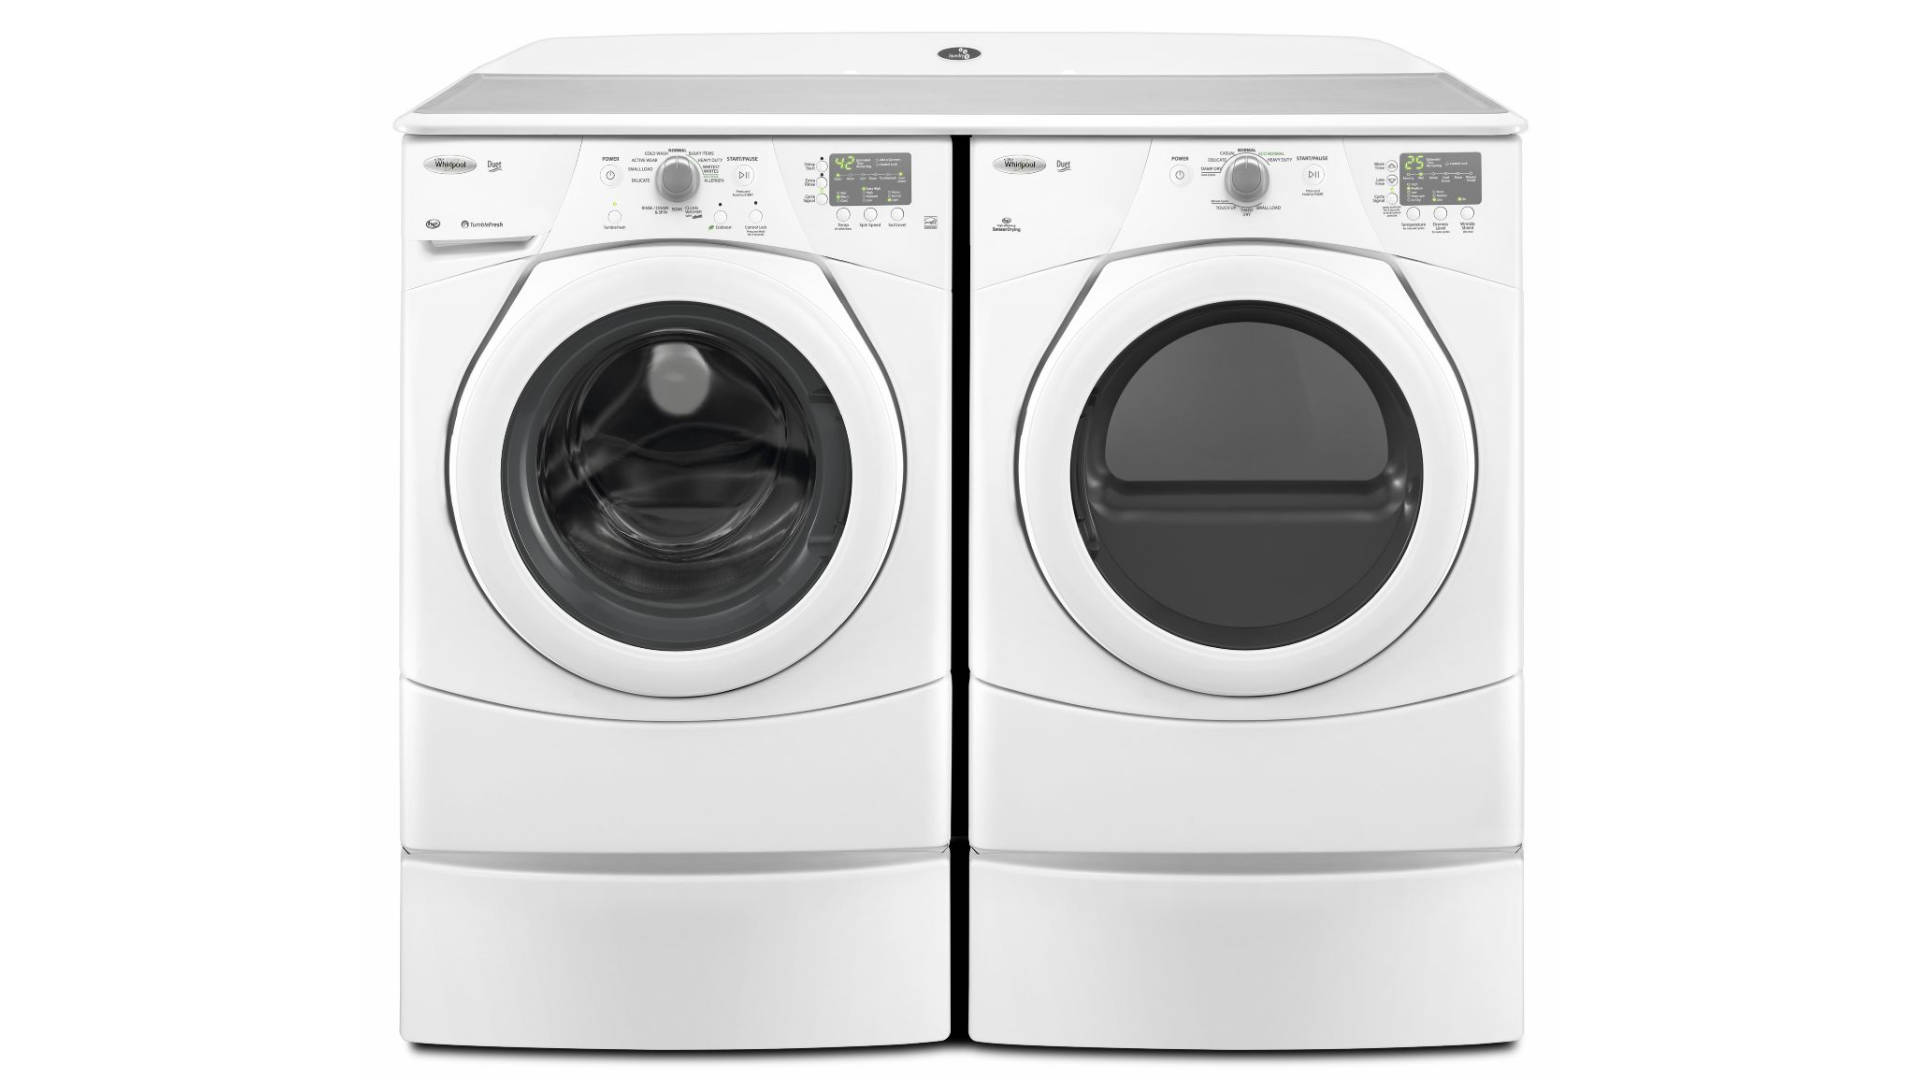 How To Fix The Error Code F38 For Whirlpool Washer